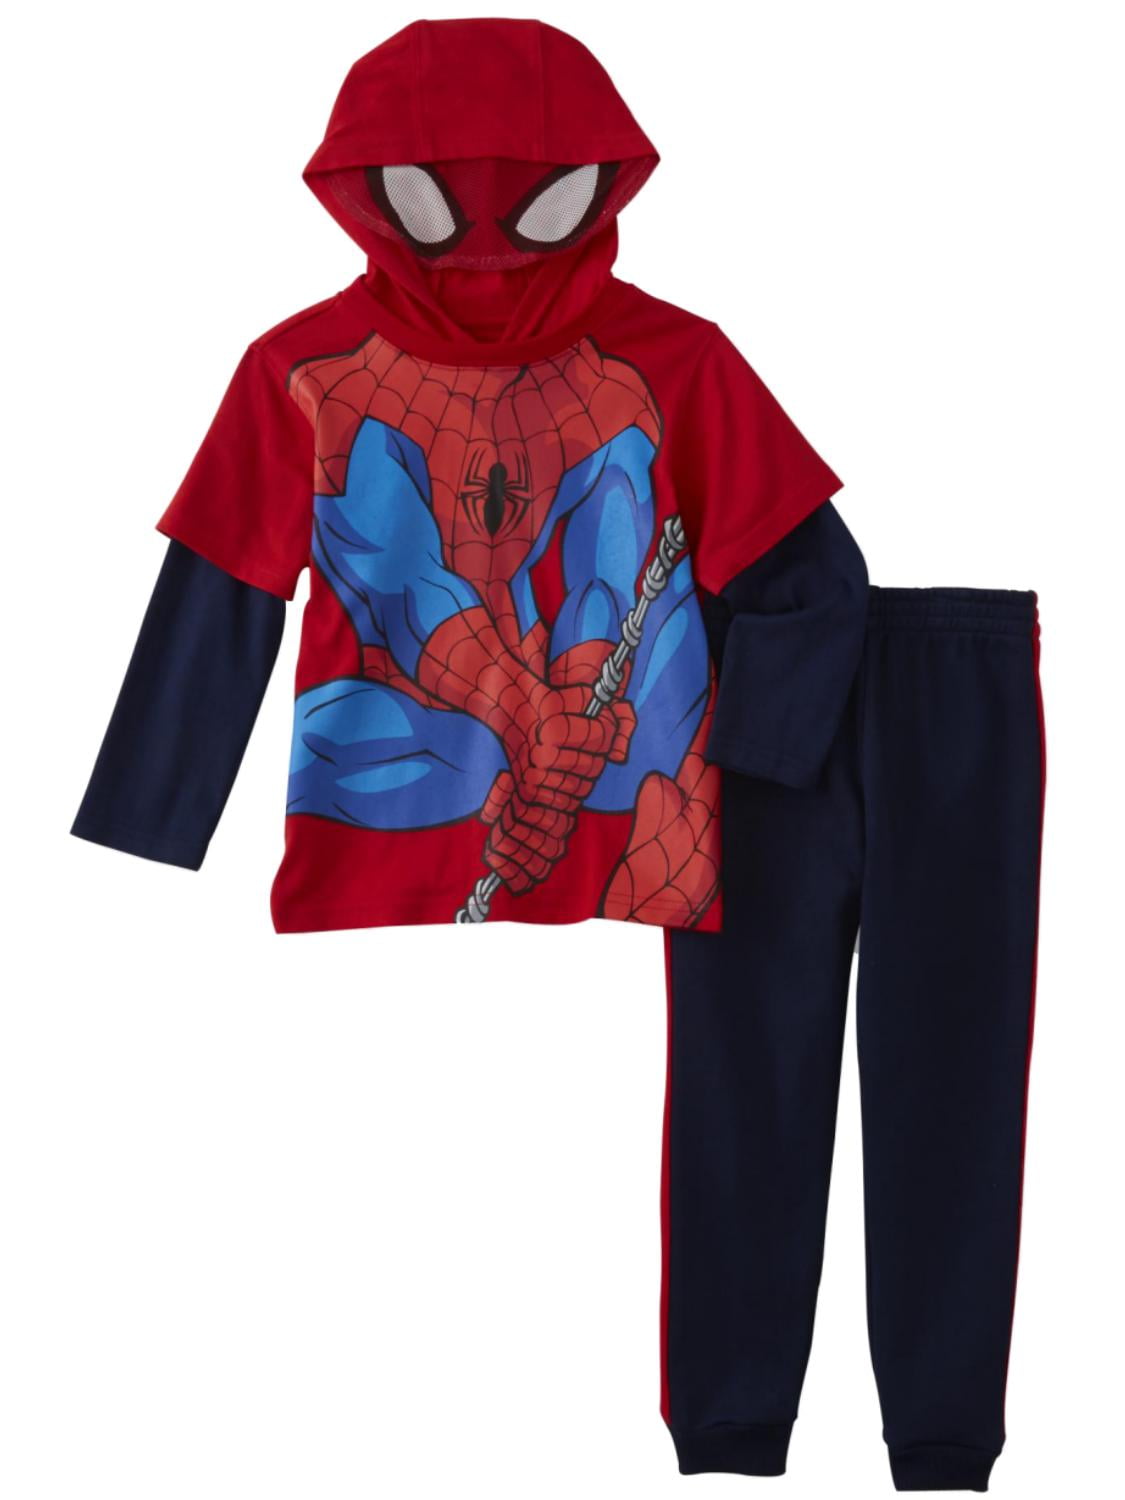 New Ultimate Marvel Heros Spiderman Toddler Boys Nylon Outfit Jacket Pants 2T-4T 